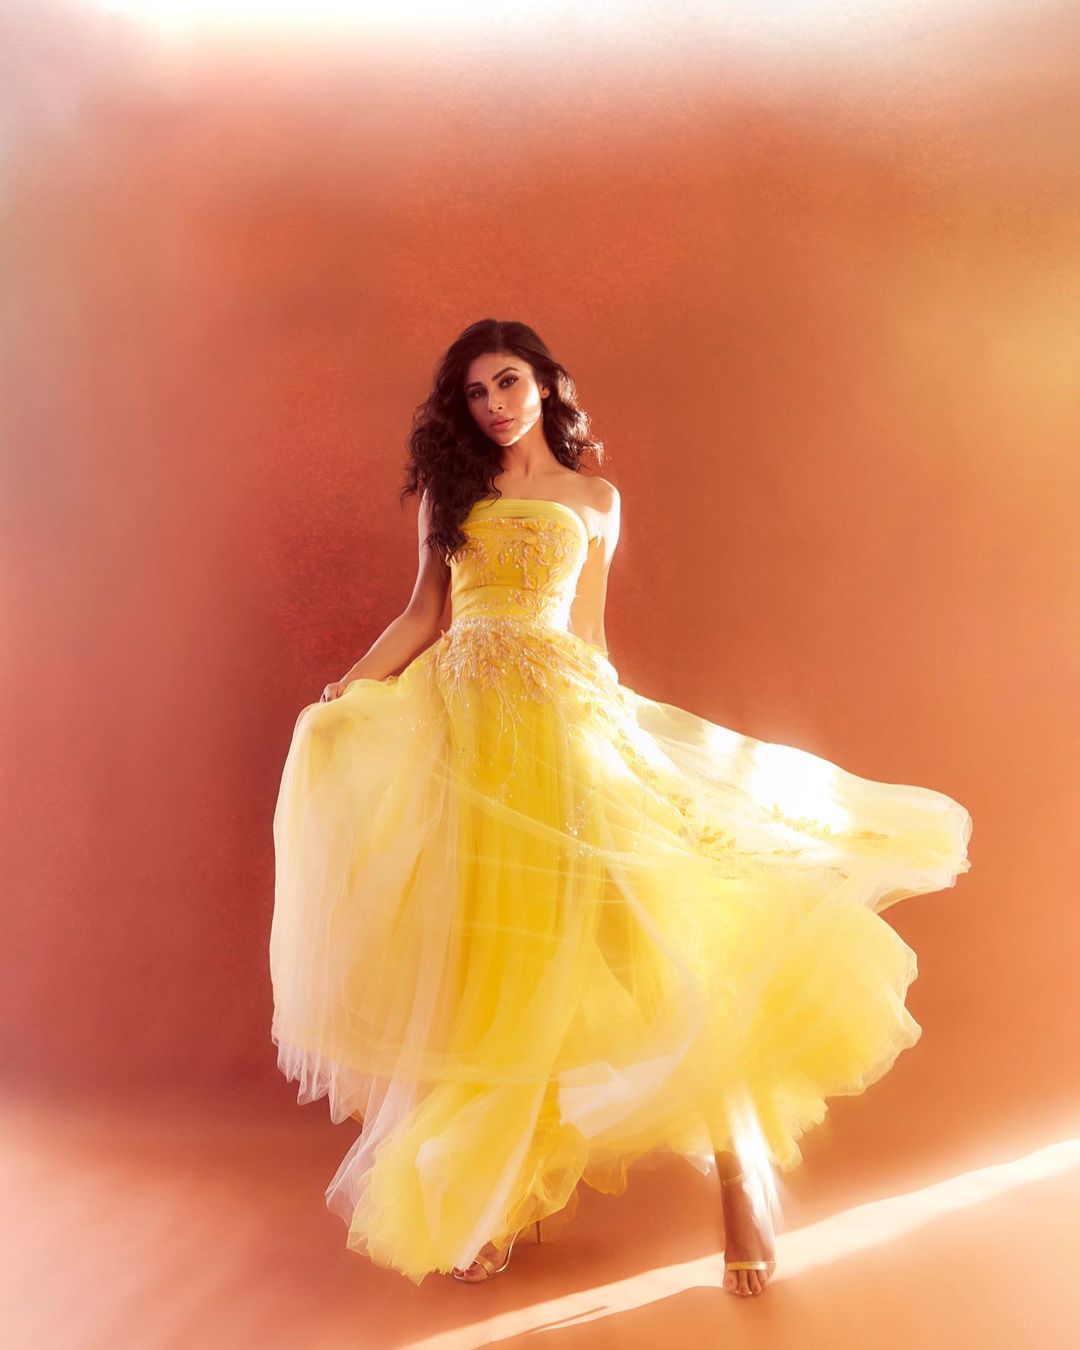 Mouni Roy resembles to Princess Belle from Beauty and The Beast in the photoshoot